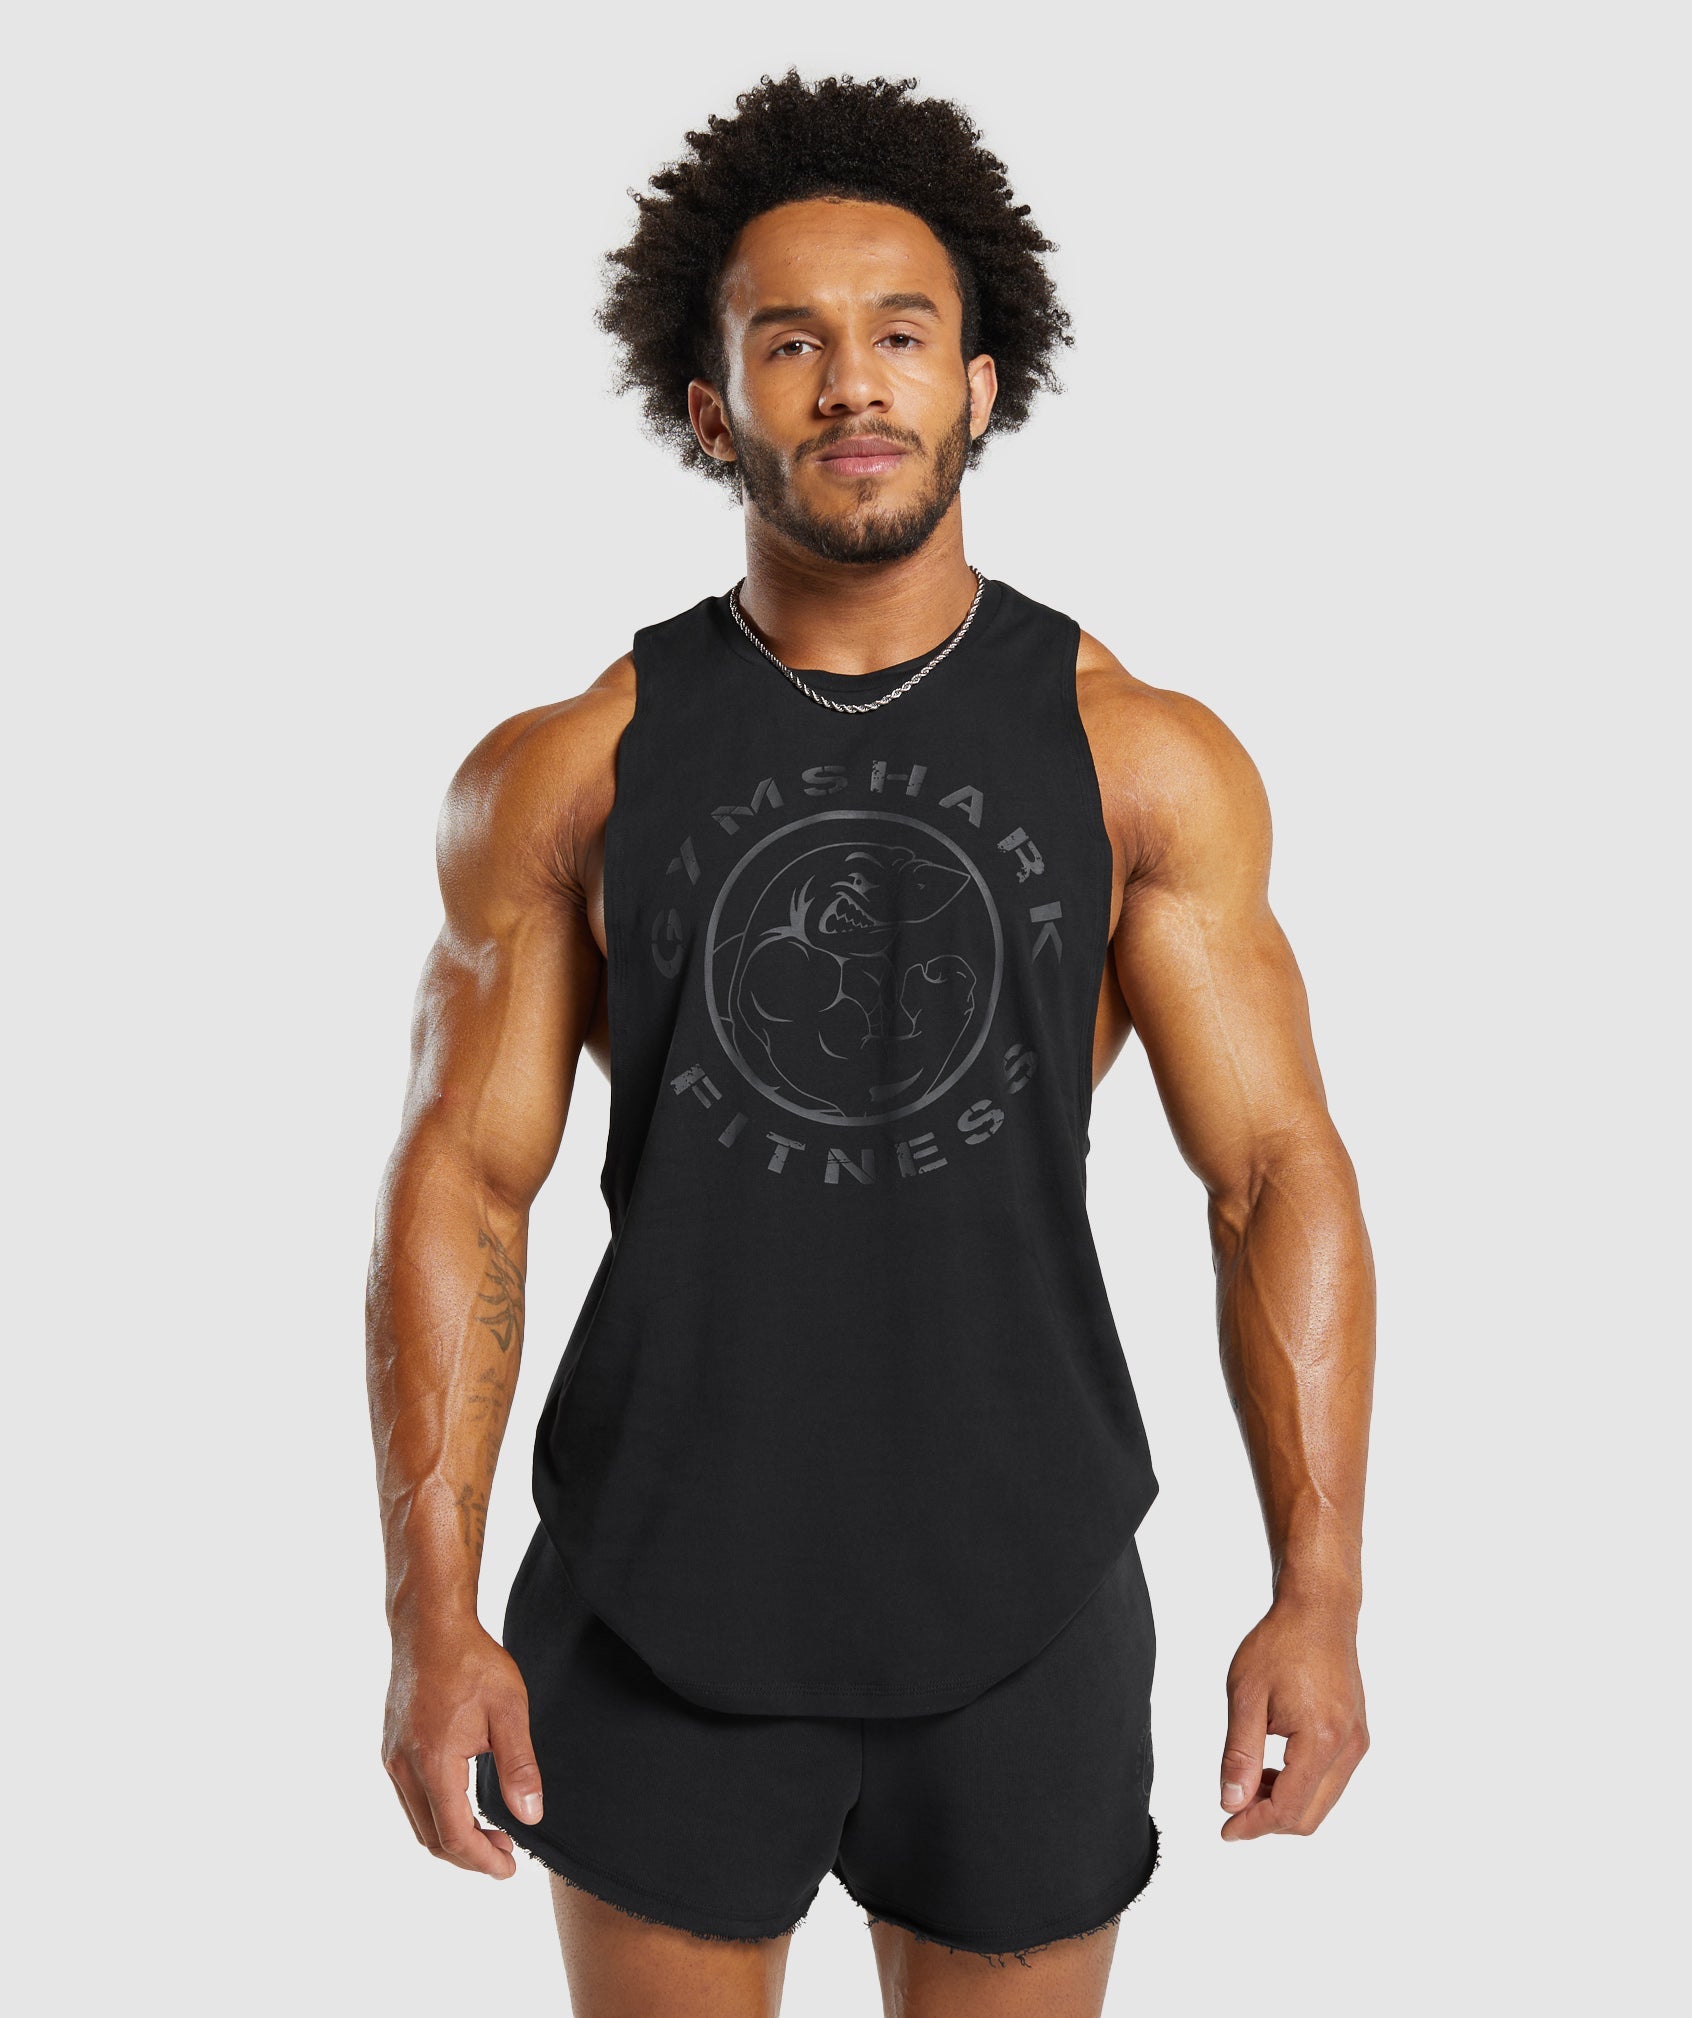 Legacy Drop Arm Tank in Black is out of stock